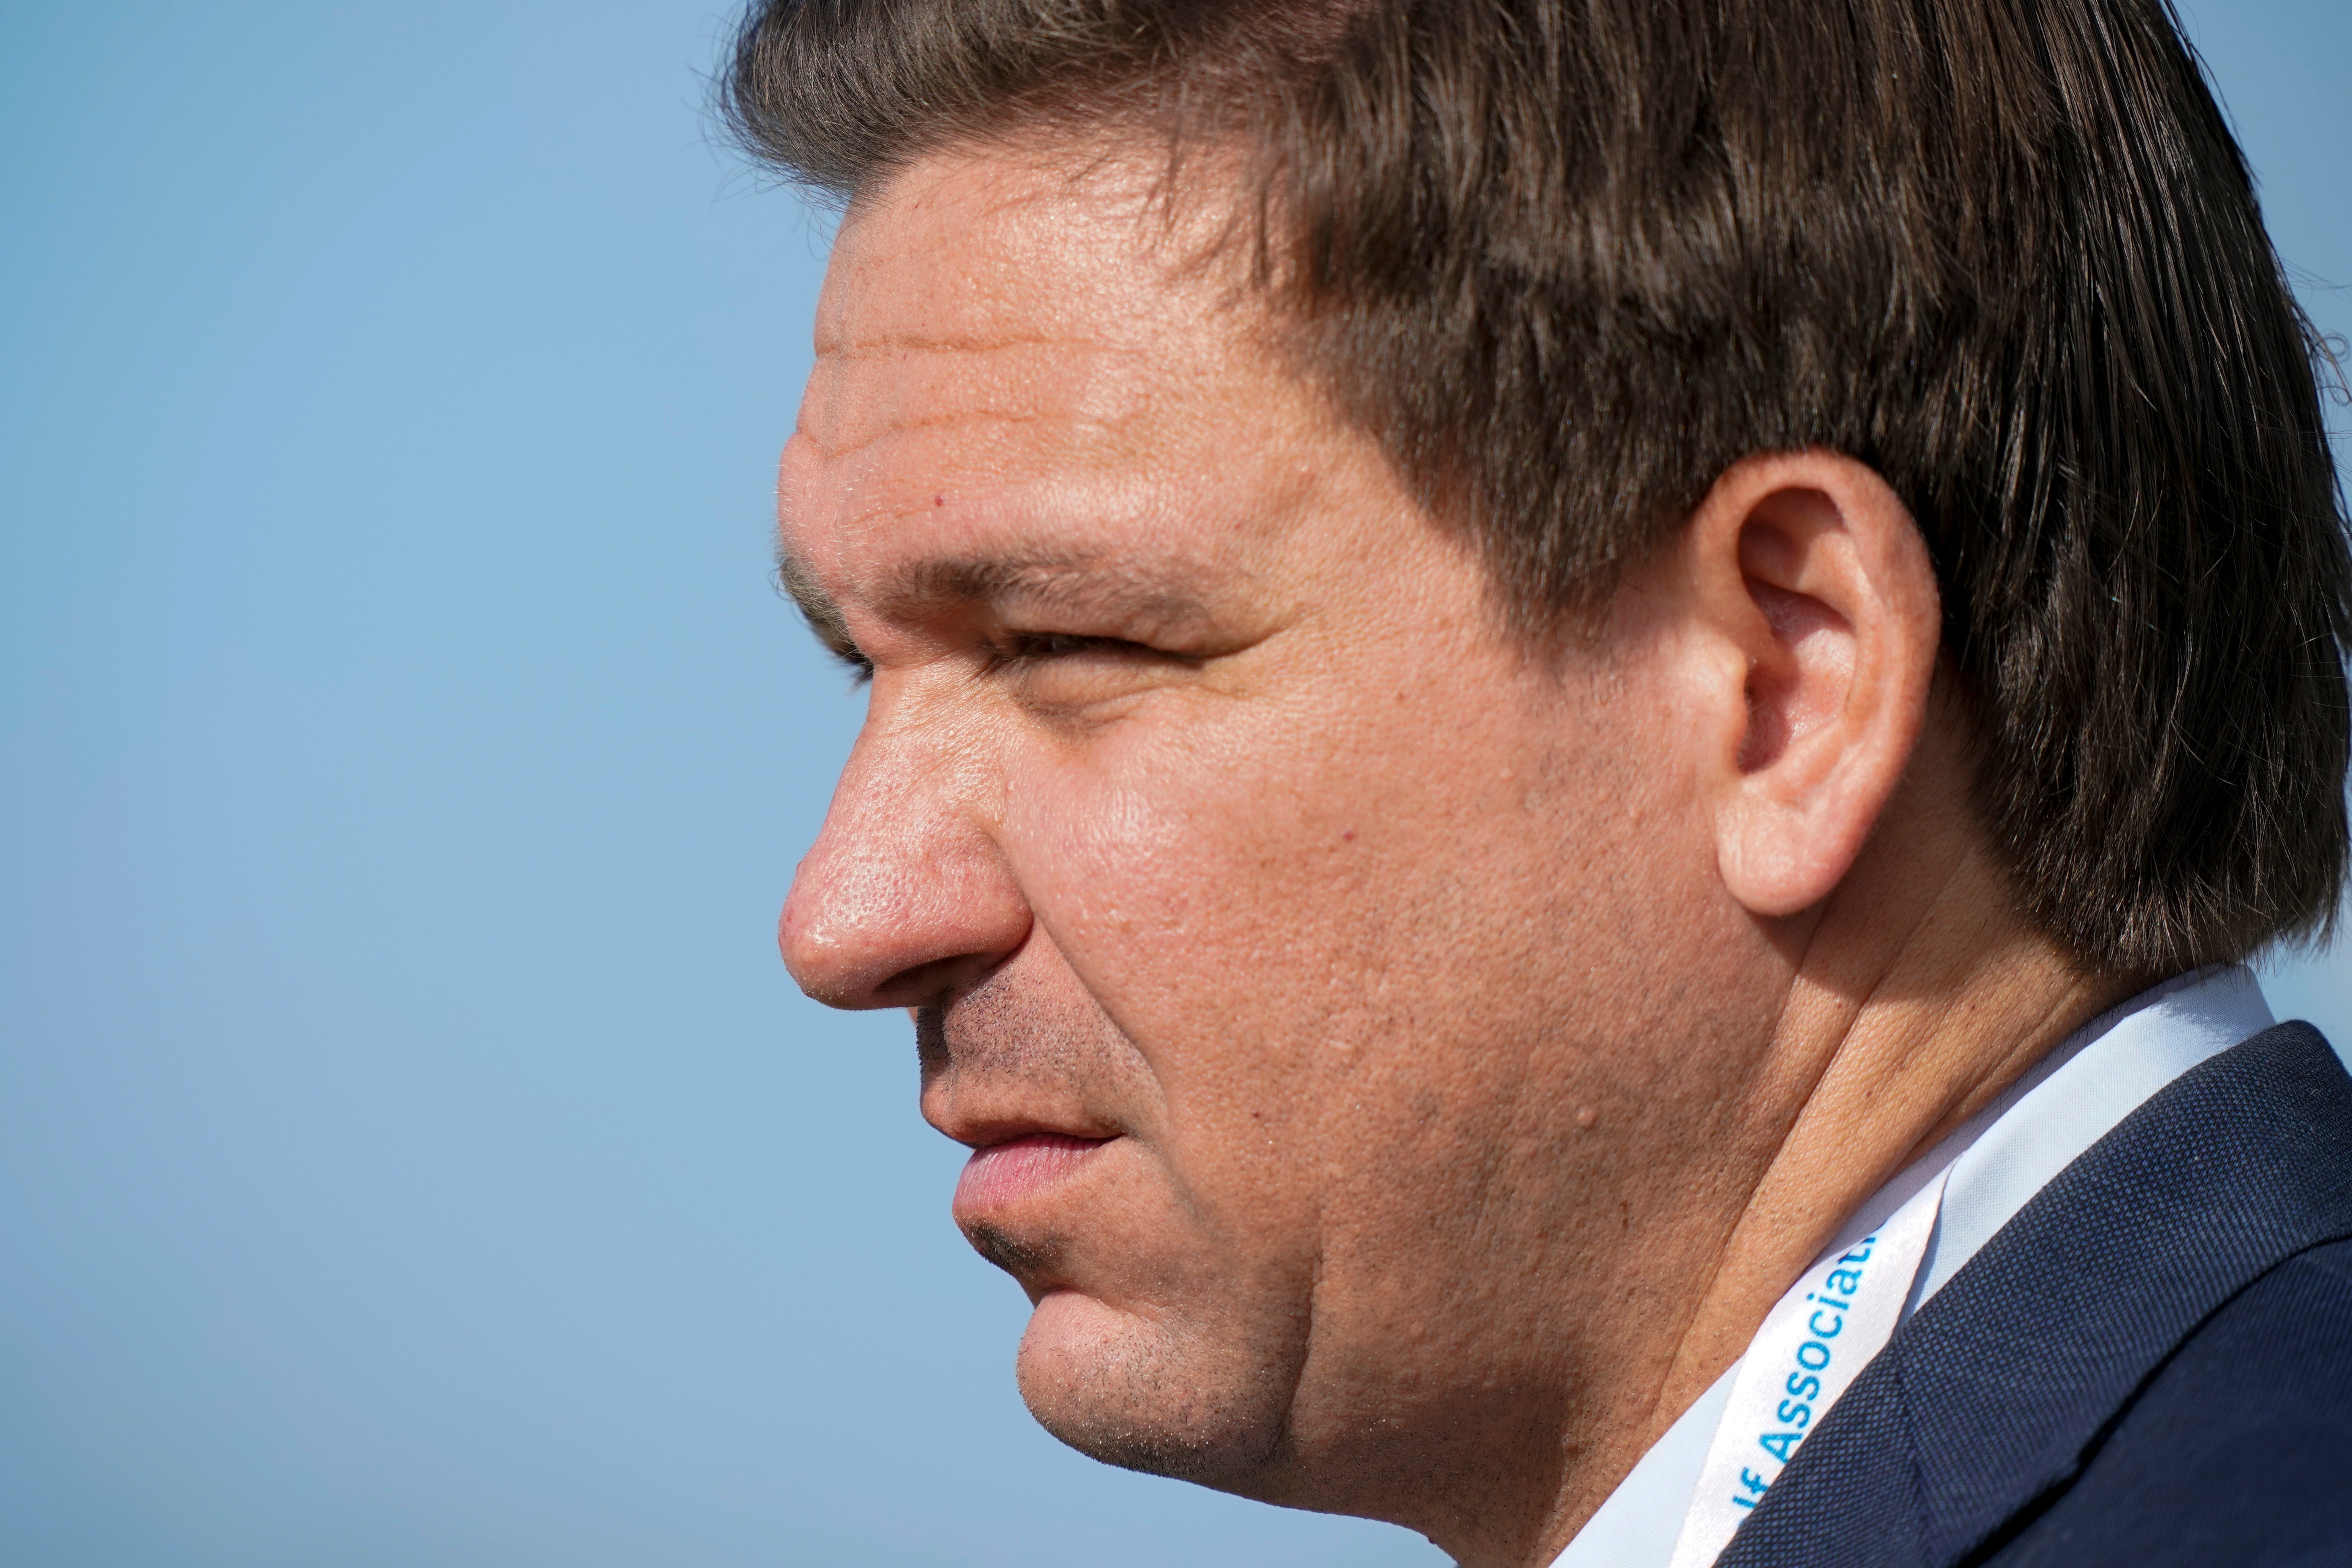 Florida’s governor, Ron DeSantis, may have the authority to intervene if Donald Trump is indicted in New York